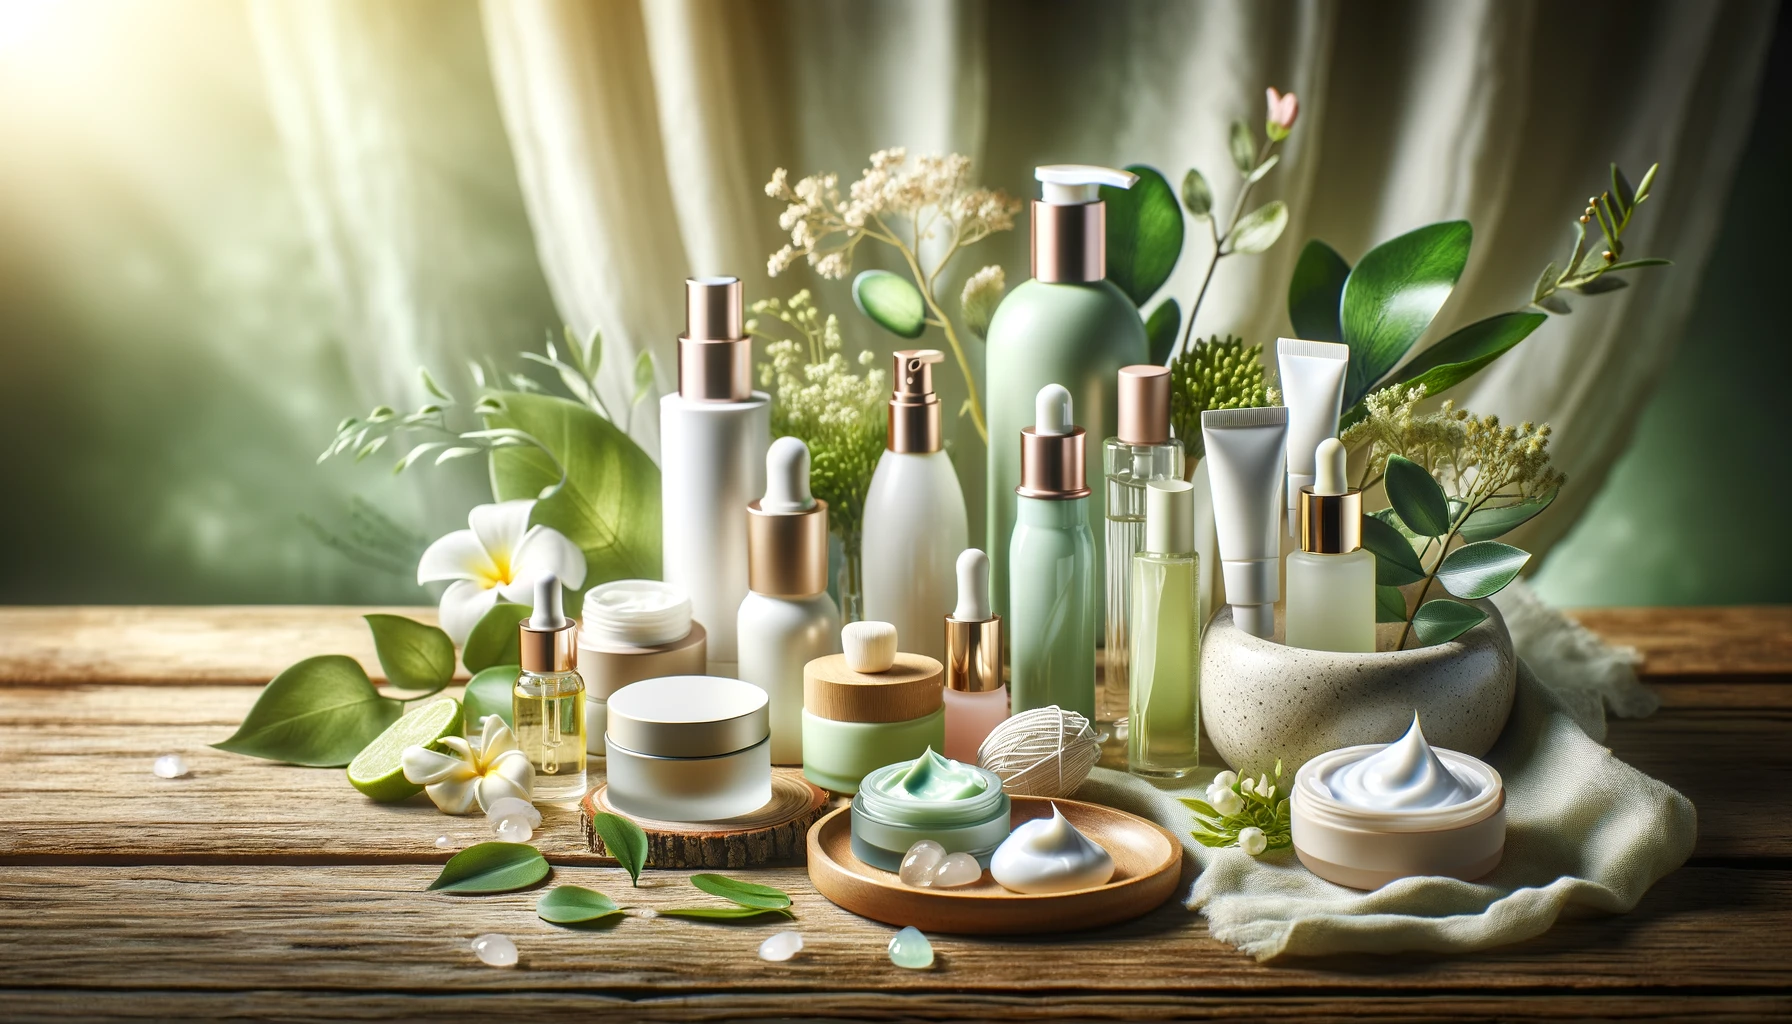 Array of Korean skincare products, highlighting the natural and luxurious approach of Healthy Life - New Start.